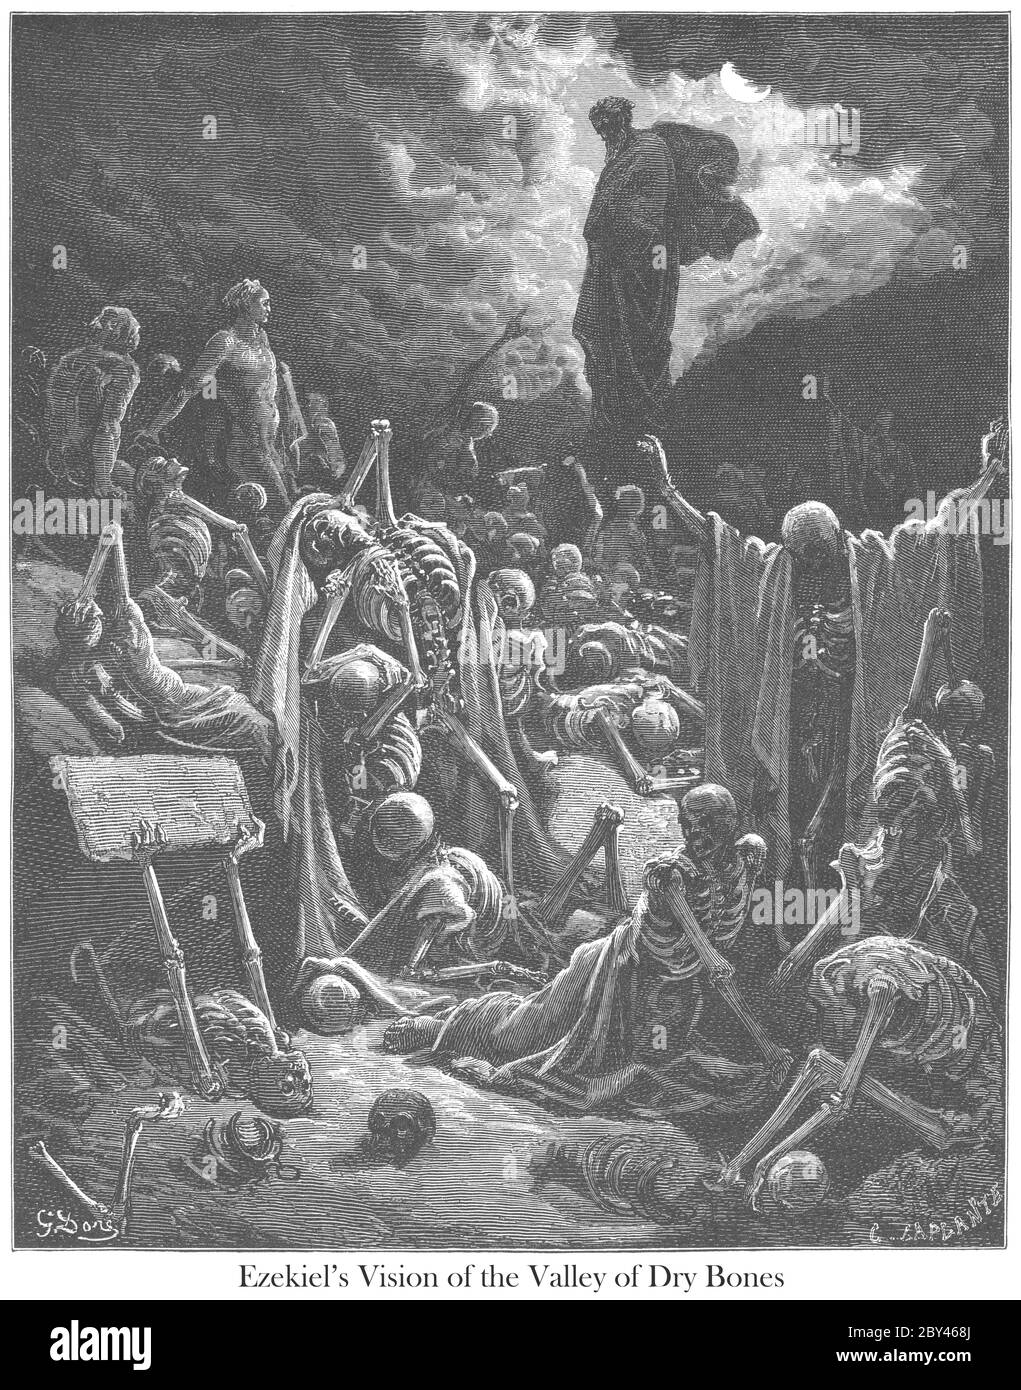 The Vision of the Valley of the Dry Bones Ezekiel 37:4-5 From the book 'Bible Gallery' Illustrated by Gustave Dore with Memoir of Dore and Descriptive Letter-press by Talbot W. Chambers D.D. Published by Cassell & Company Limited in London and simultaneously by Mame in Tours, France in 1866 Stock Photo